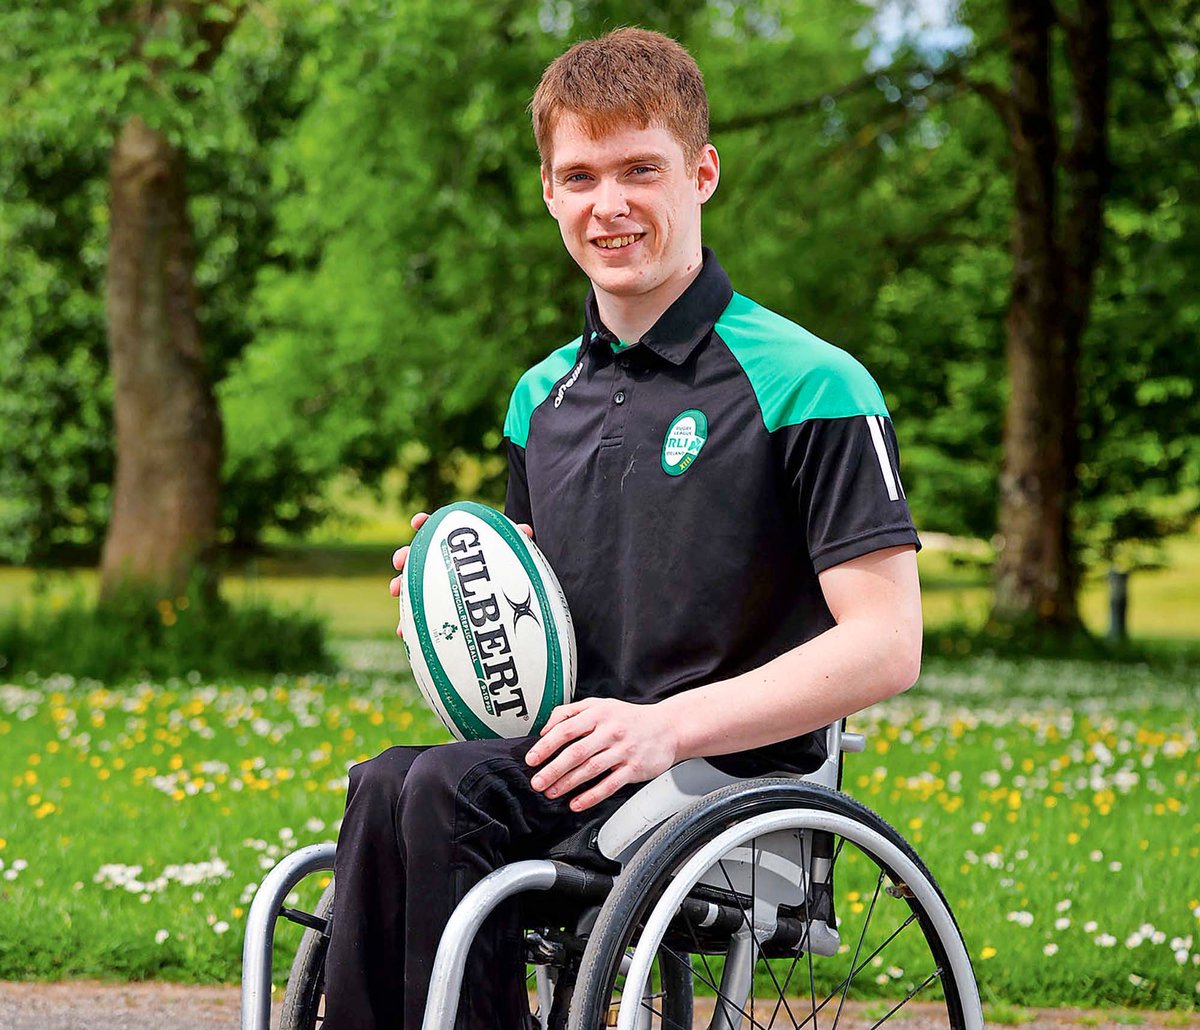 The pride of Kerry rests on the shoulders of Listowel man Cian Horgan who’s battling the might of Wales this June in the Wheelchair Rugby League World Cup. Read Cian’s story in tomorrow’s Kerry’s Eye